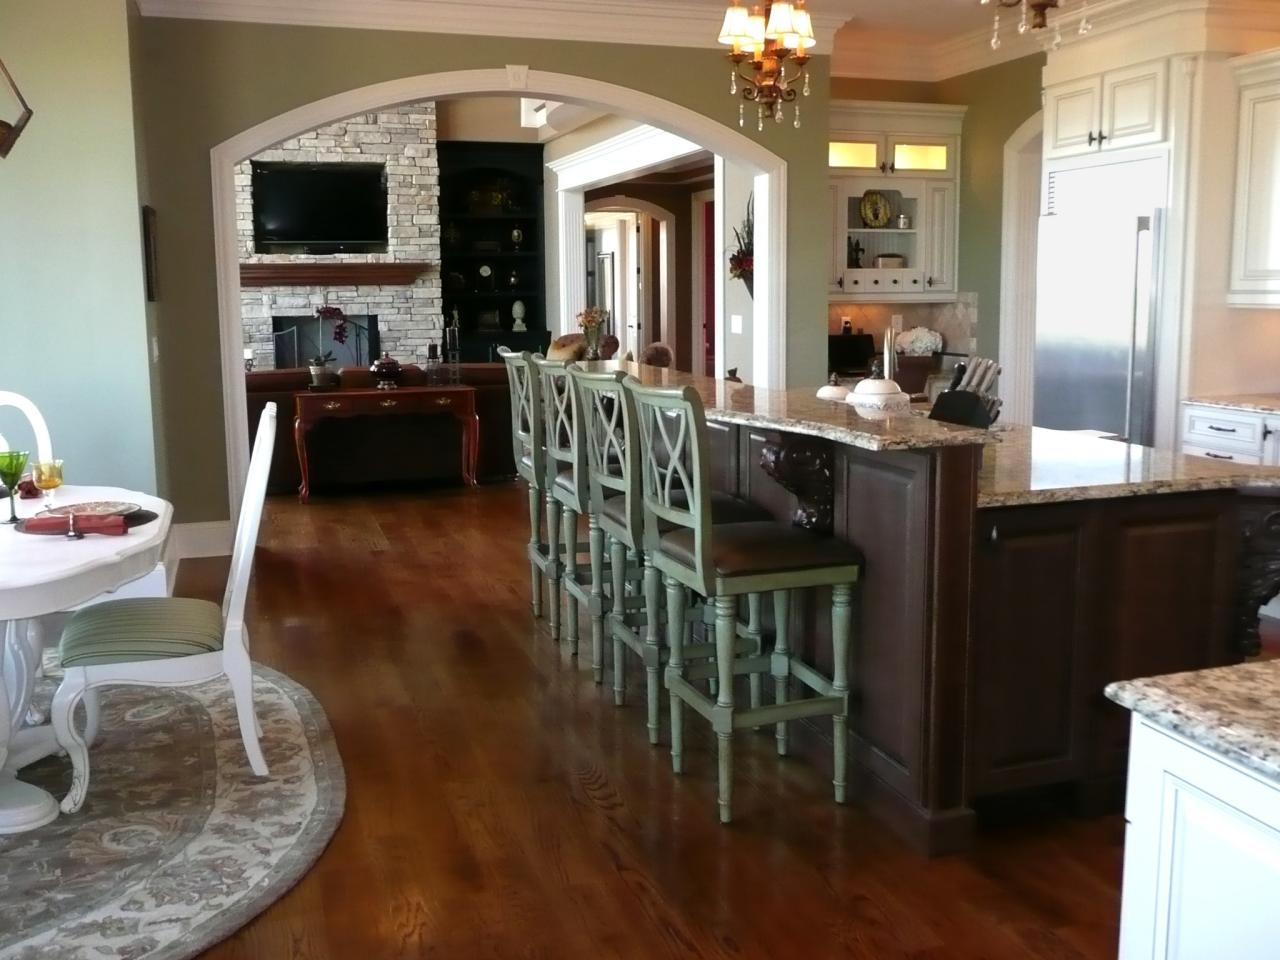 Kitchen Islands With Stools Pictures, Kitchen Island And Bar Stools